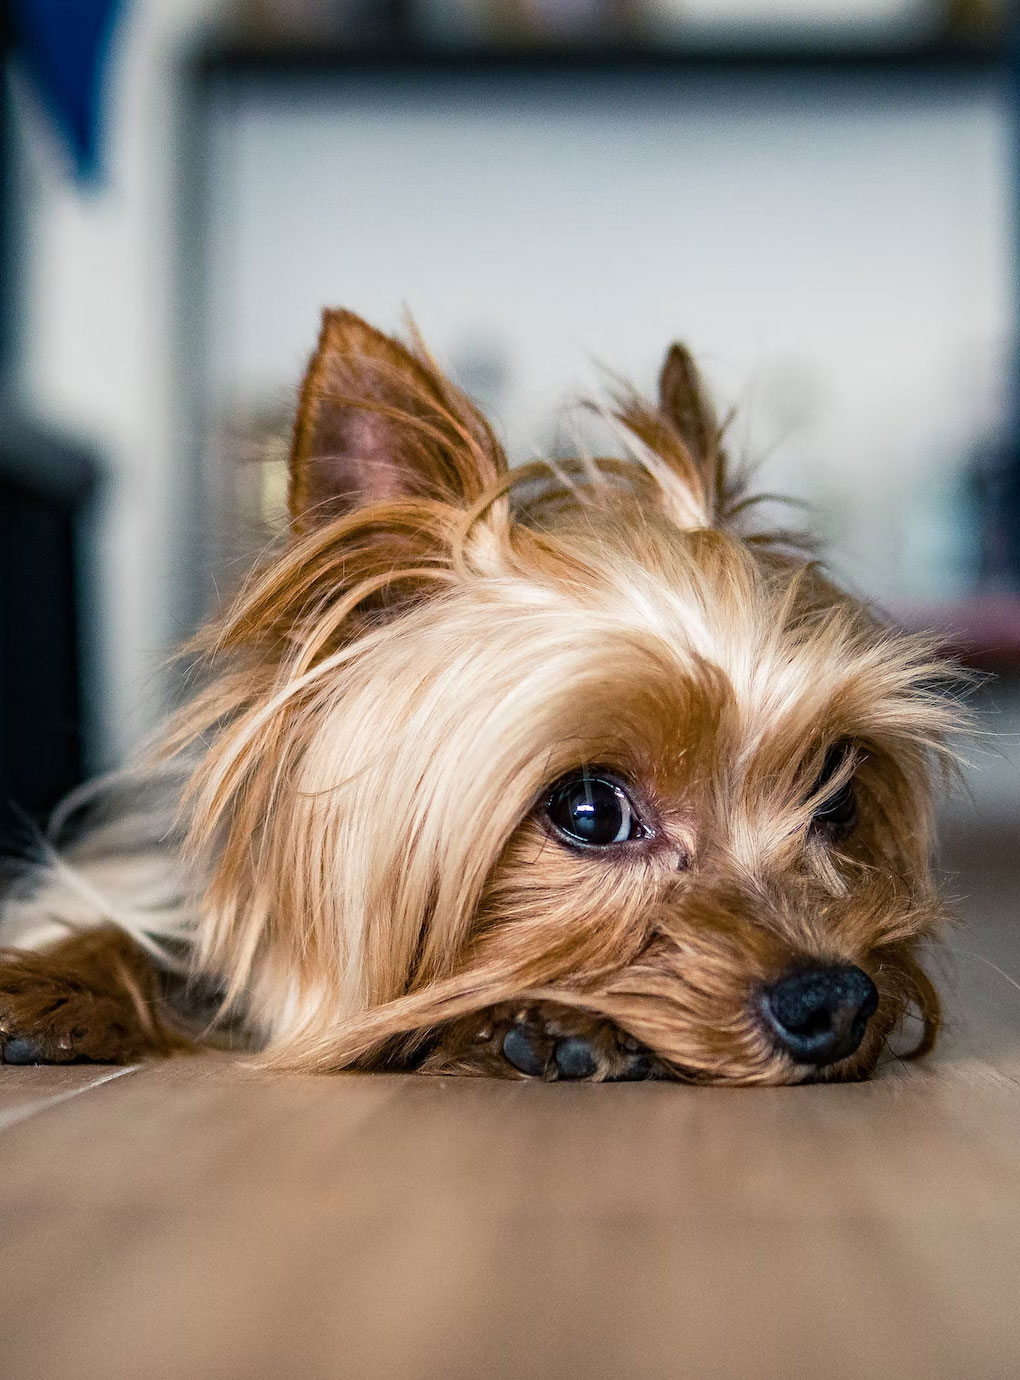 Are Yorkie's Playful Dogs?